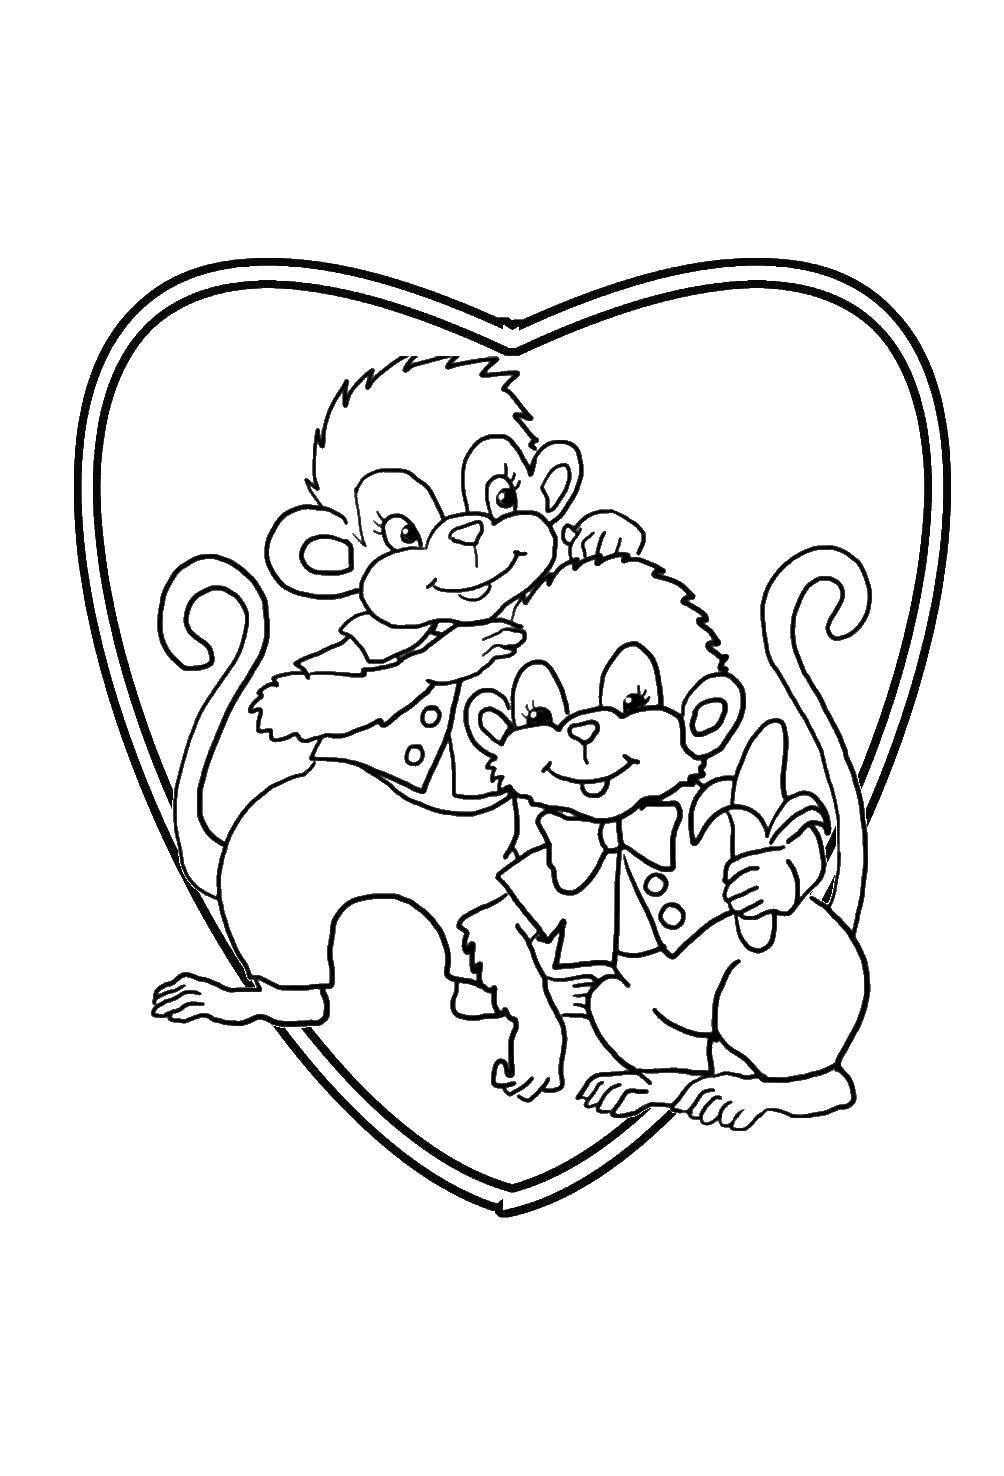 Coloring Monkeys on the background of hearts. Category Animals. Tags:  animals, monkey, heart.